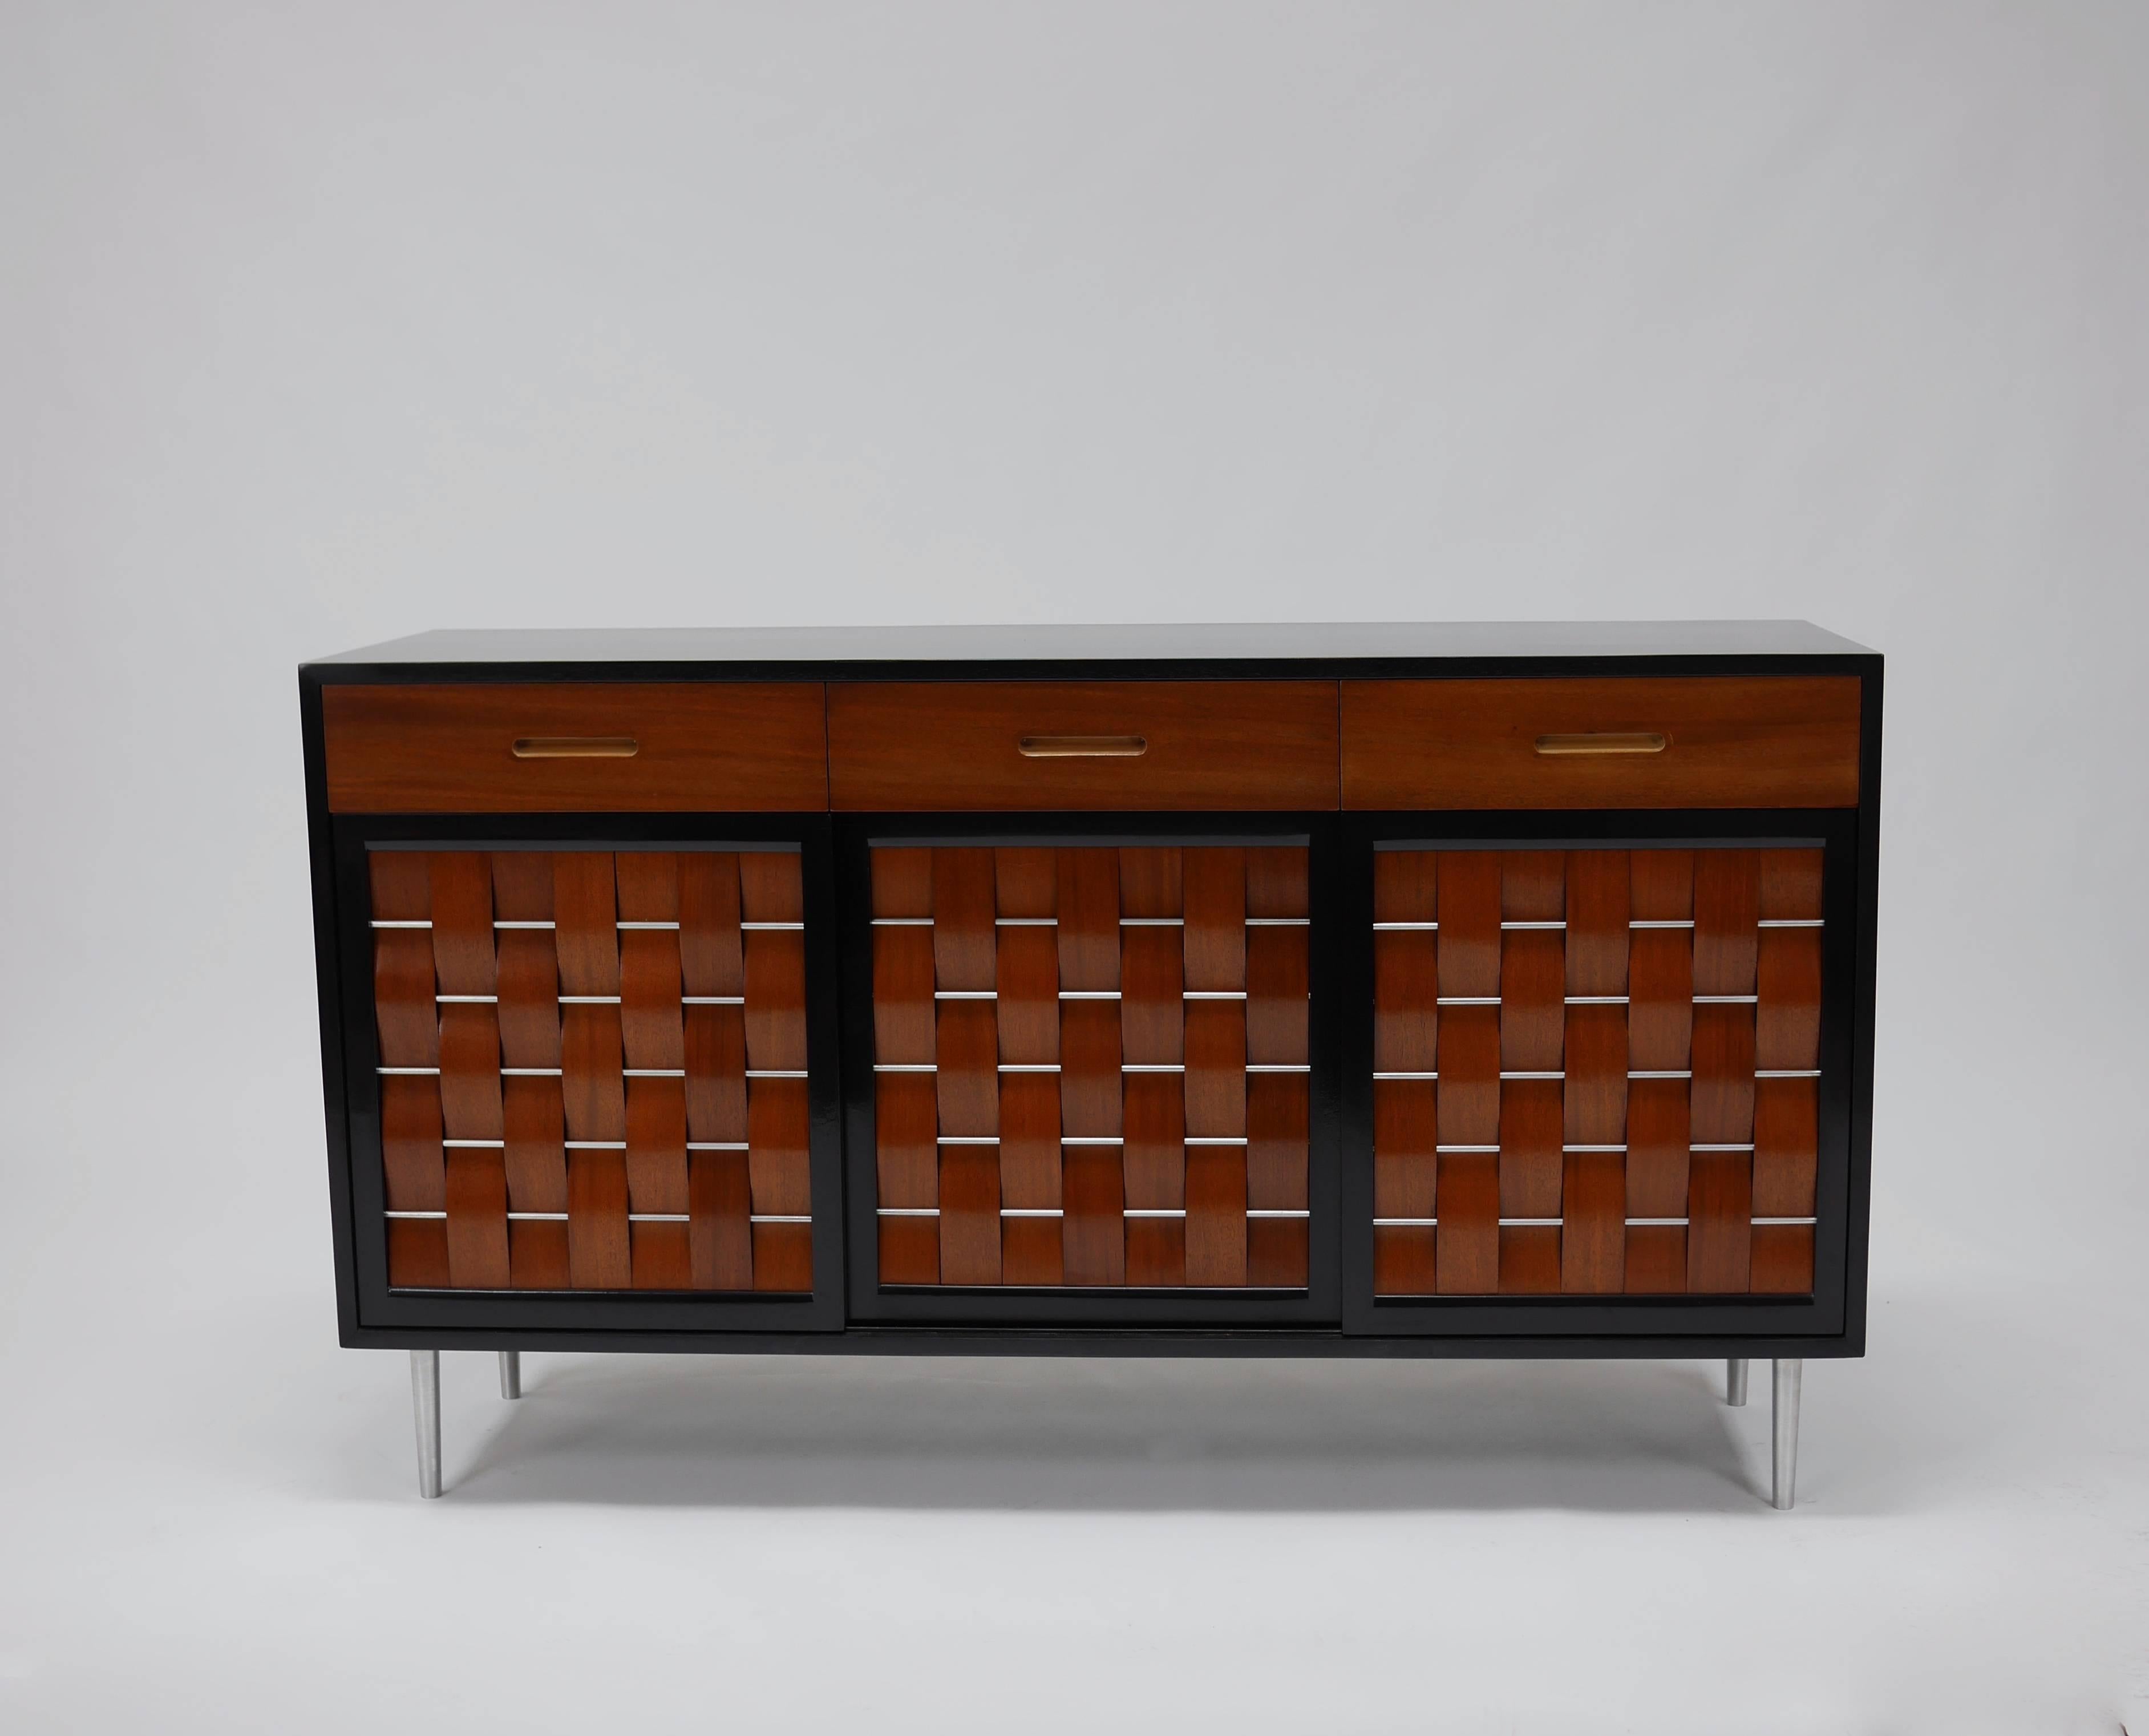 Edward Wormley for Dunbar. Model 5324 Credenza with two toned woven front doors and drawers, Features three top drawers with three sliding doors that conceal six drawers and two adjustable shelves. Aluminum accents and legs. Recent professional